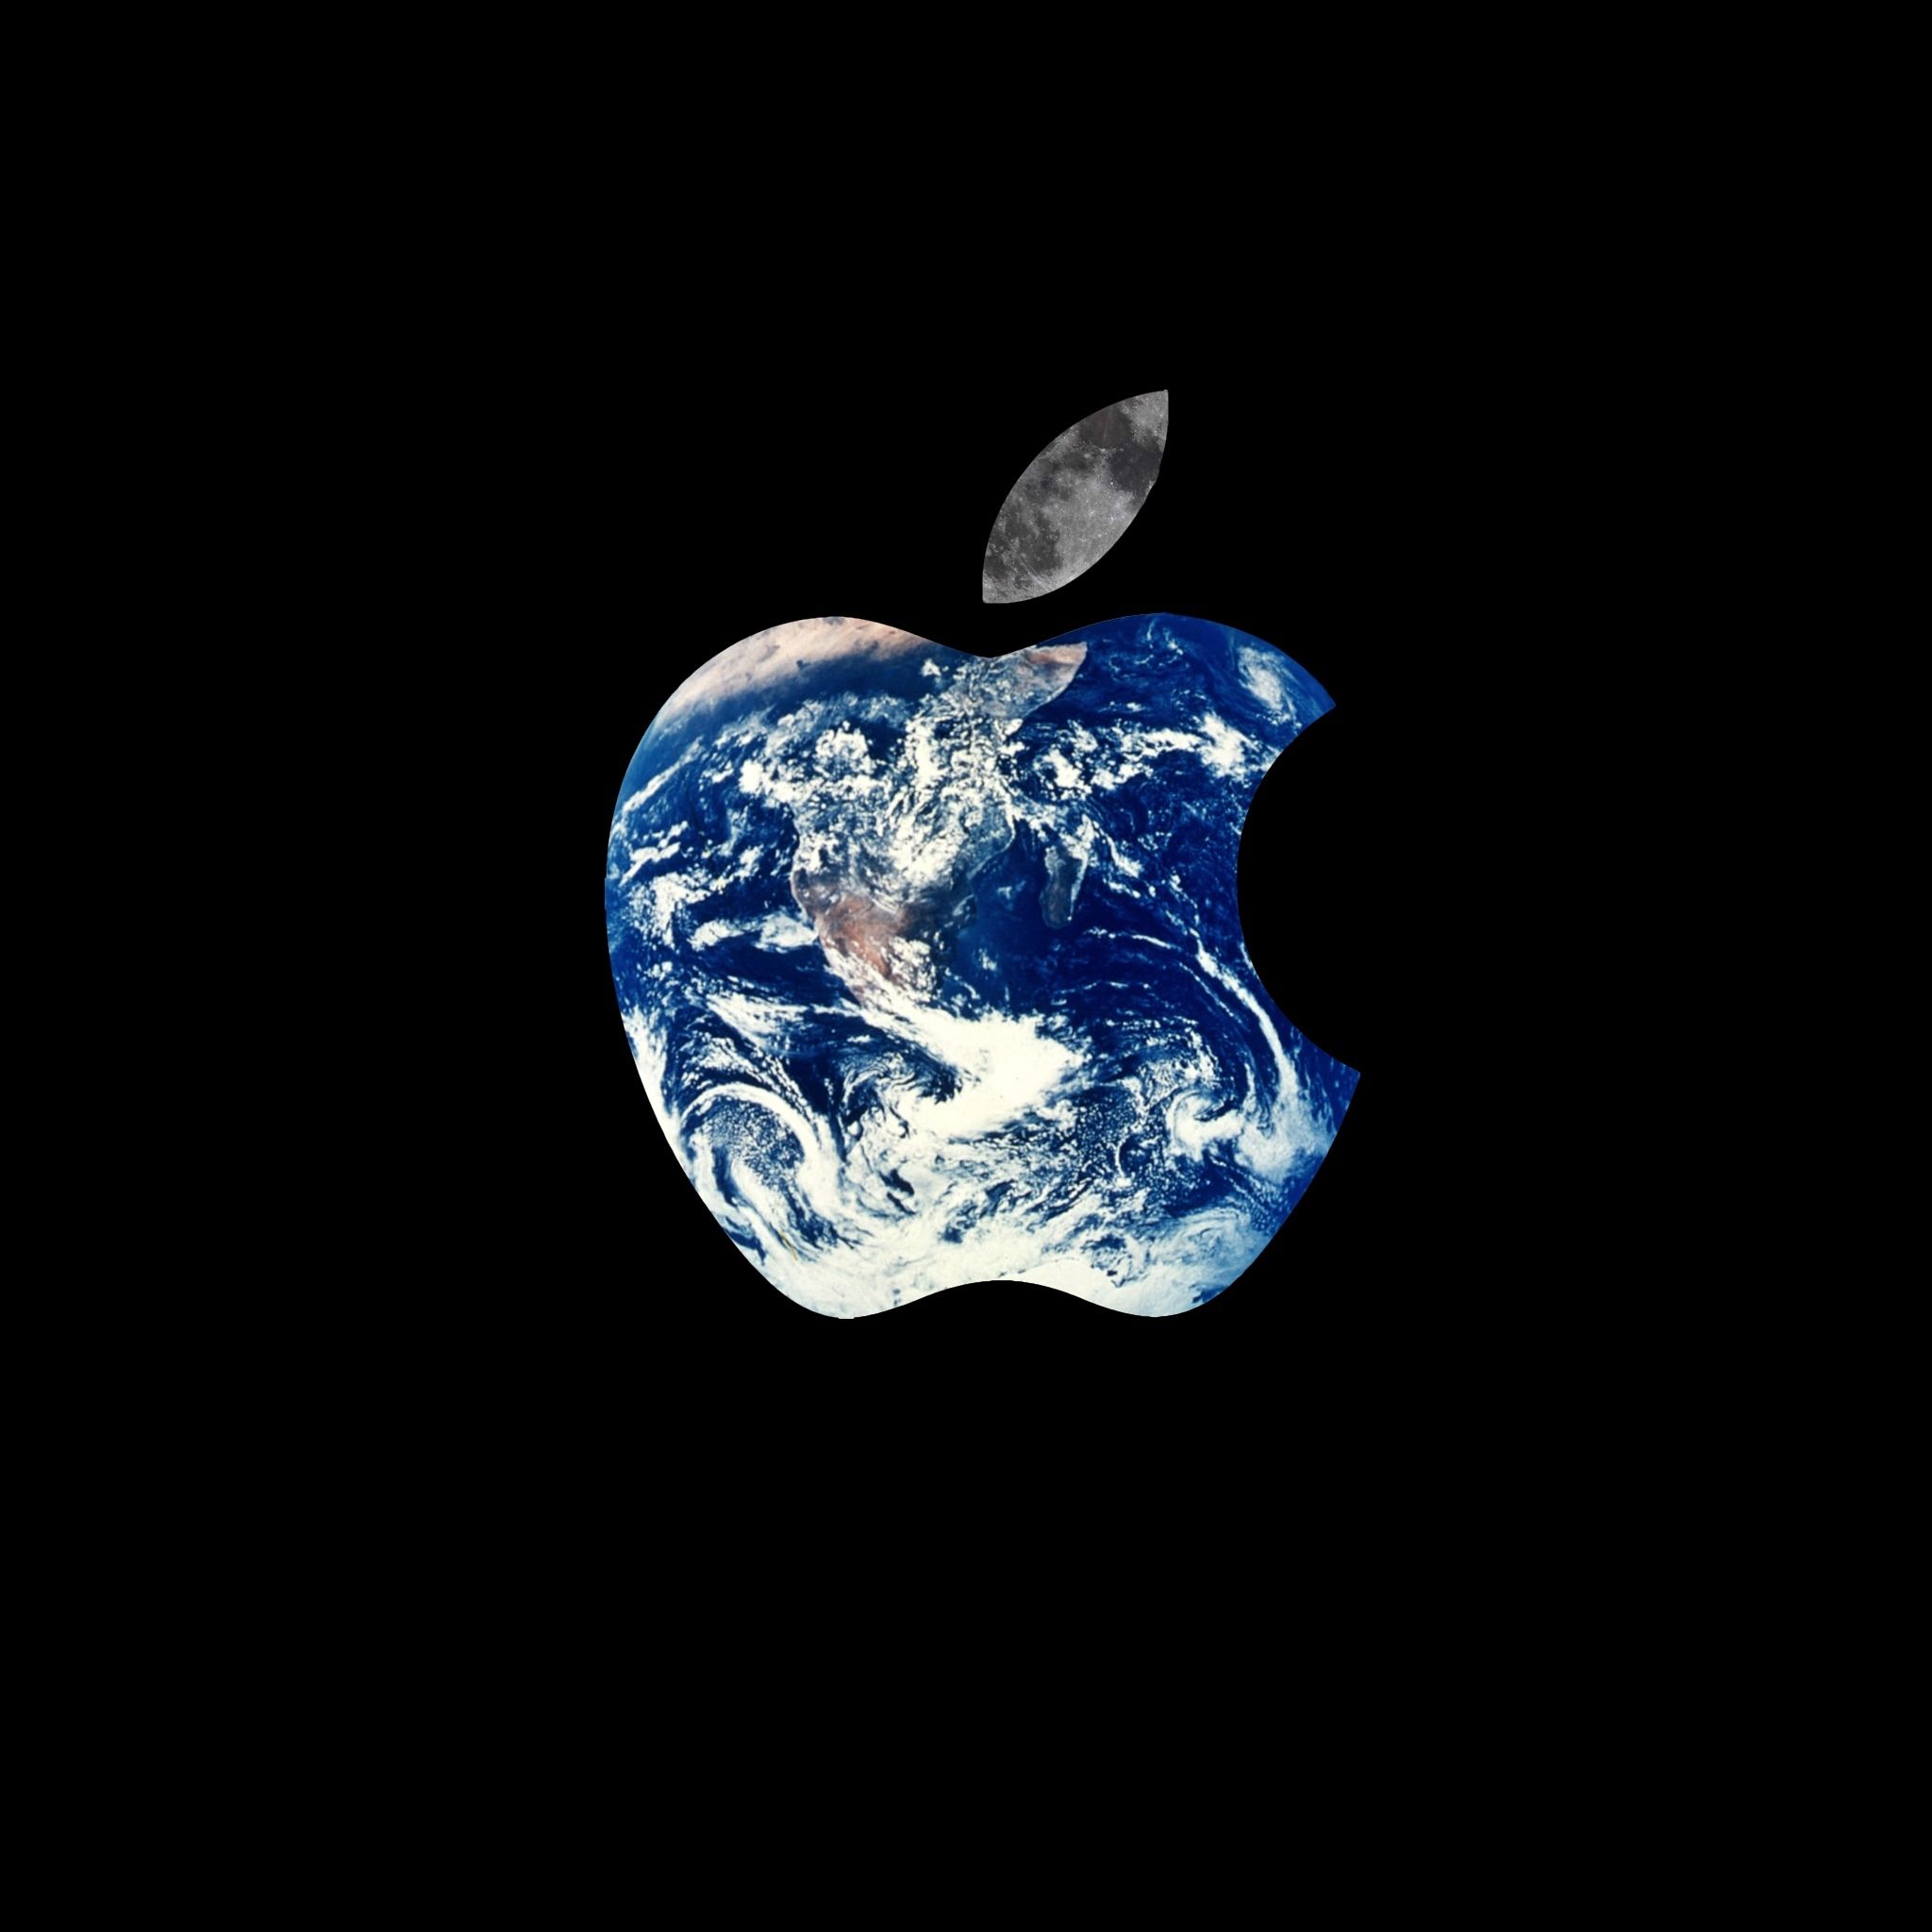 Iphone Earth Wallpapers 4k Hd Iphone Earth Backgrounds On Wallpaperbat